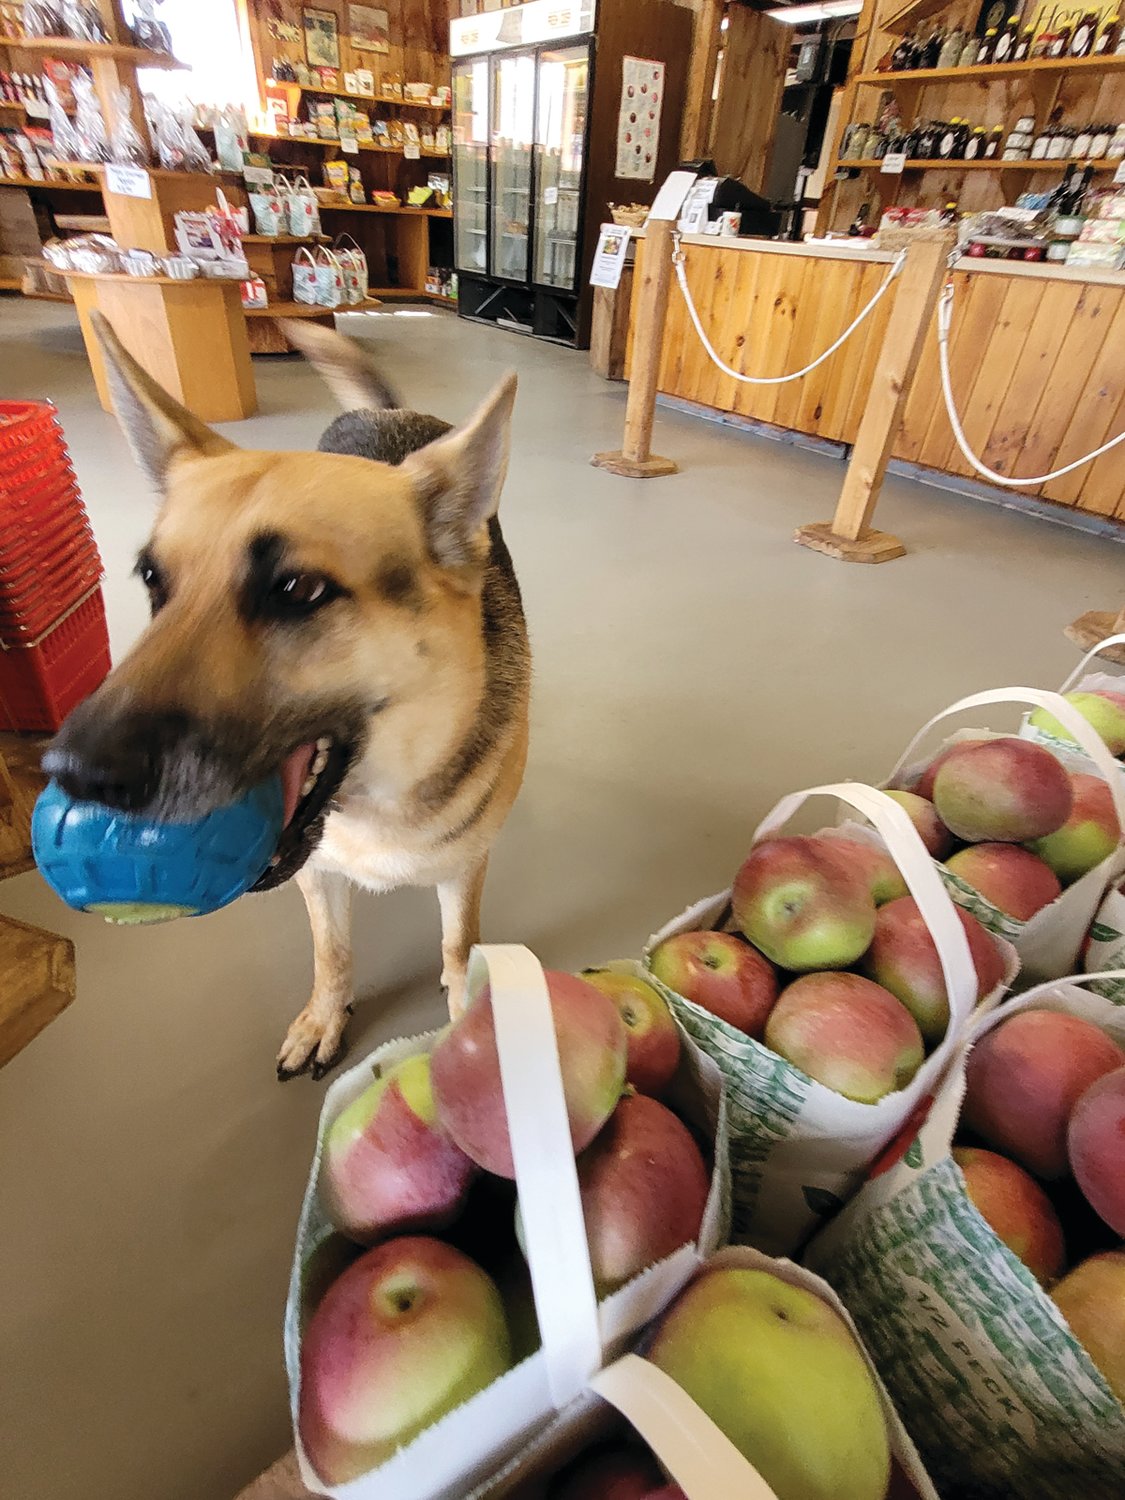 DOGGONE GOOD APPLES: The owners of Appleland have a beautiful German Shepherd named Emma.